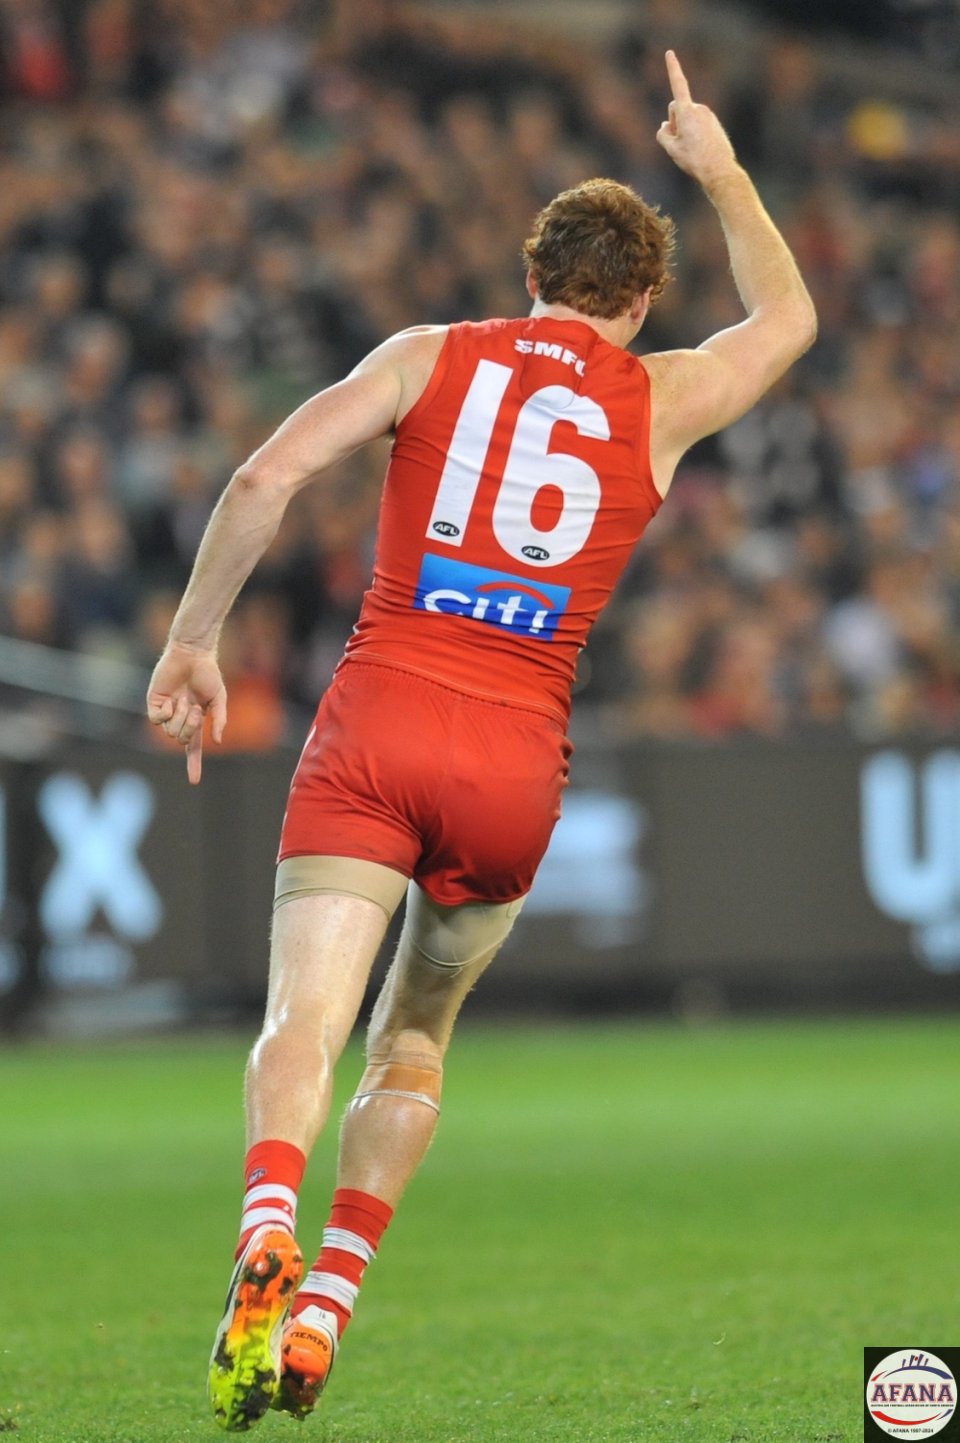 Rohan celebrates another Swans goal